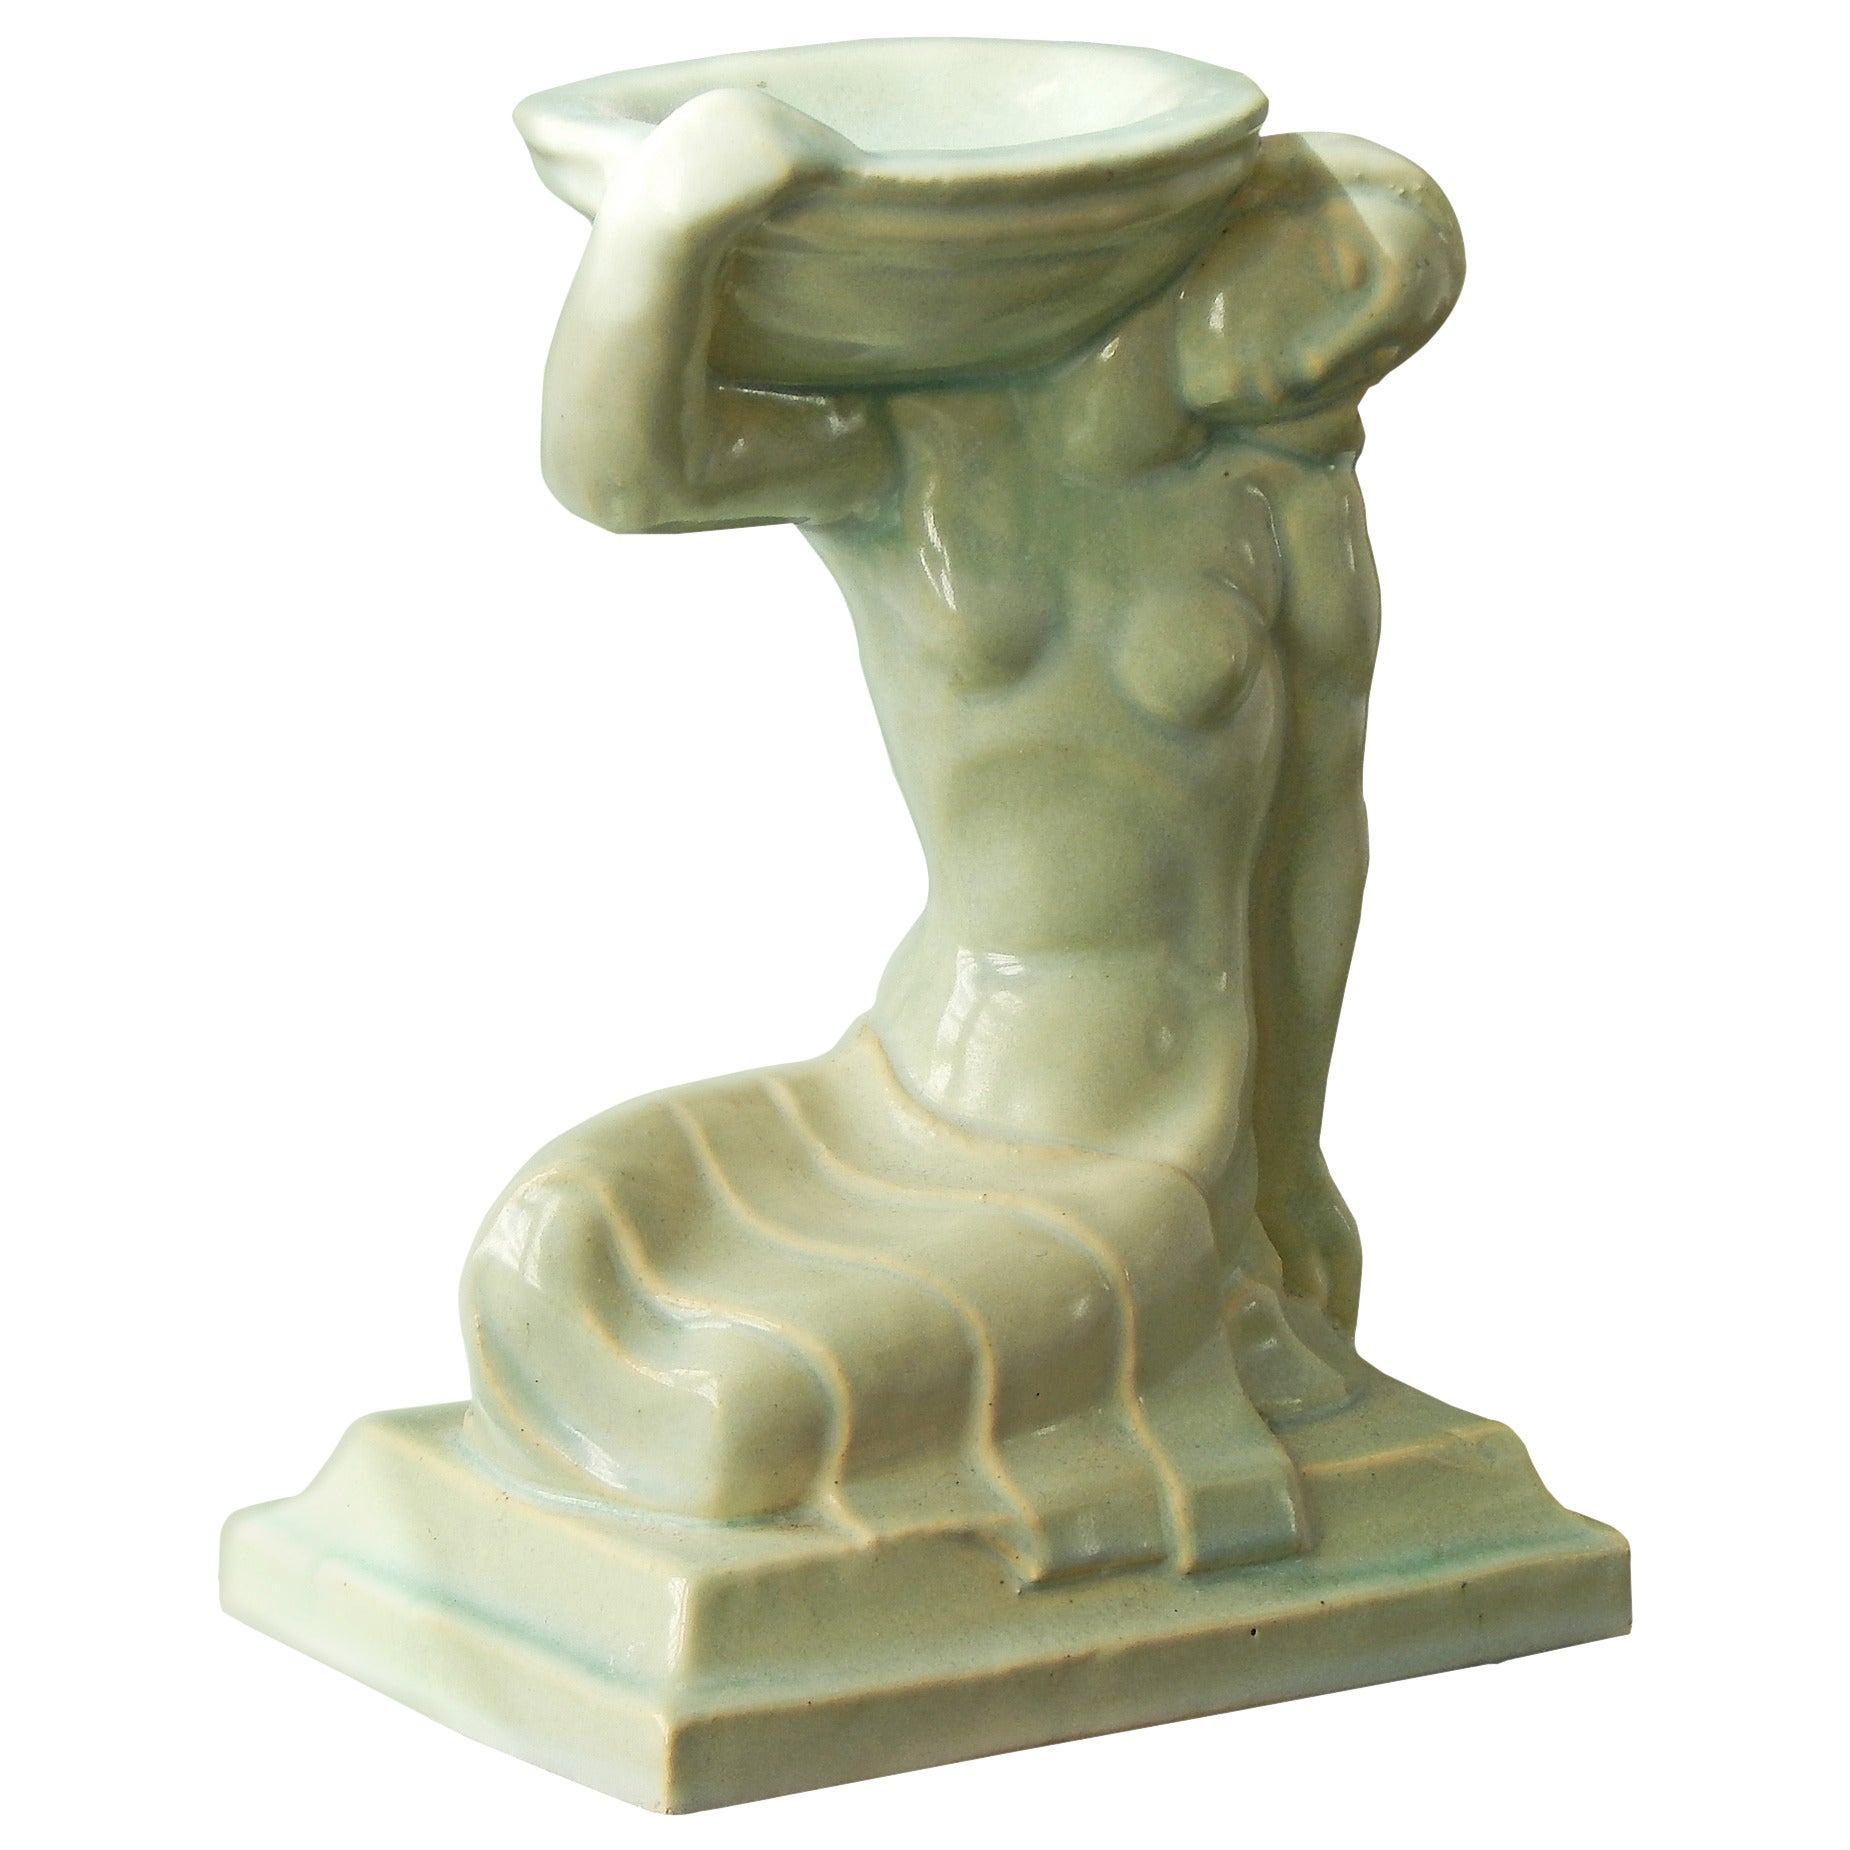 "Nude with Bowl, " Rare Art Deco Sculpture by Solon for Amer, Encaustic